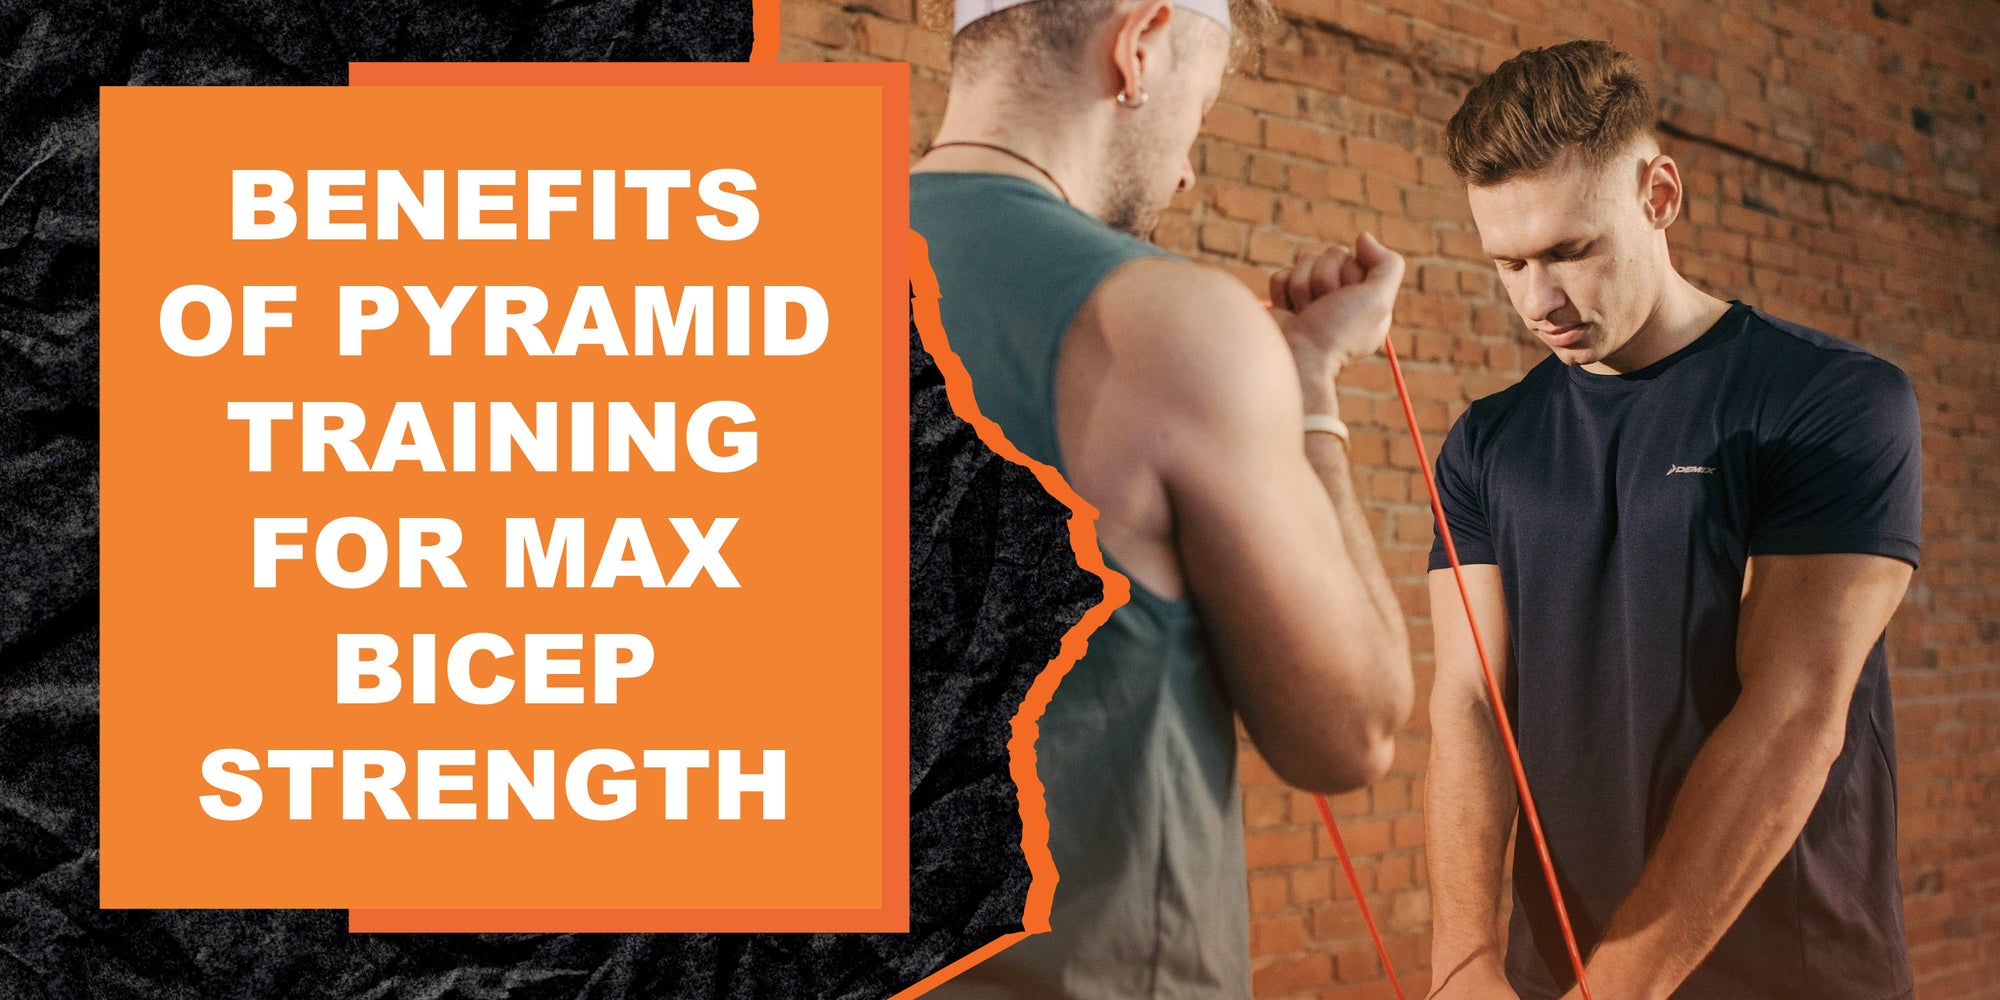 The Benefits of Pyramid Training for Maximum Bicep Strength and Size